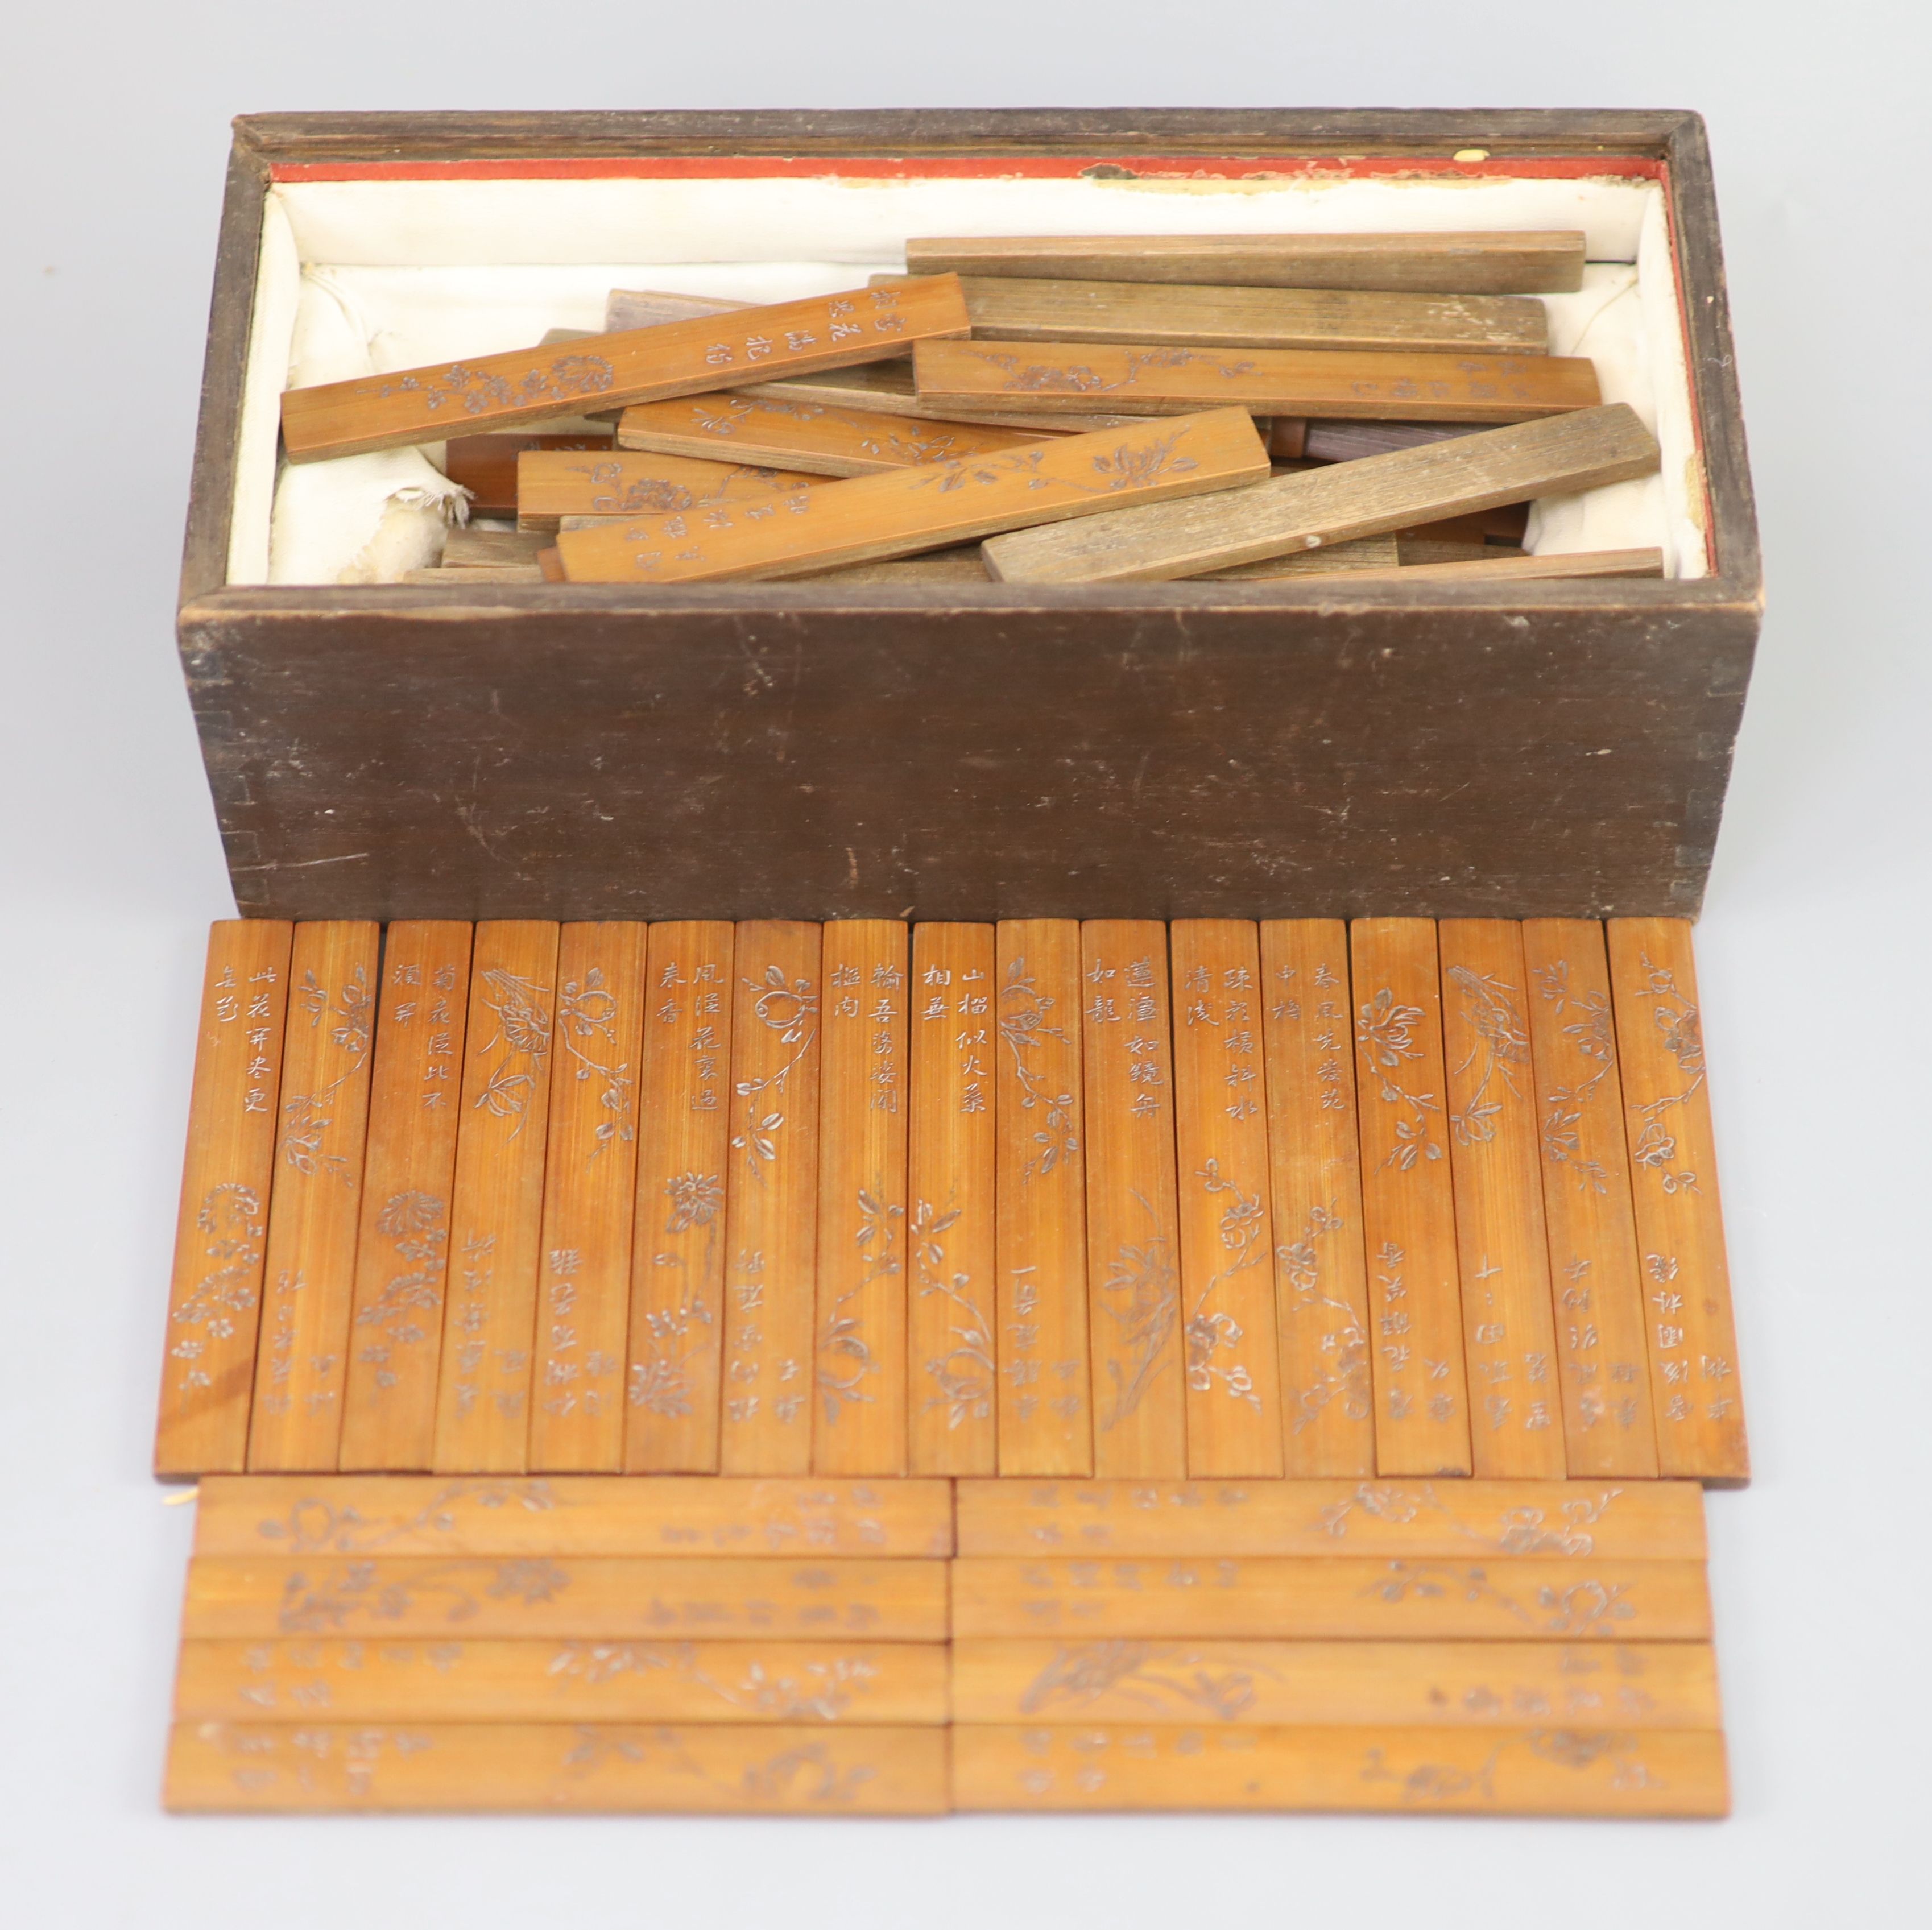 A set of sixty Chinese inscribed bamboo games counters or tallies, late Qing dynasty,